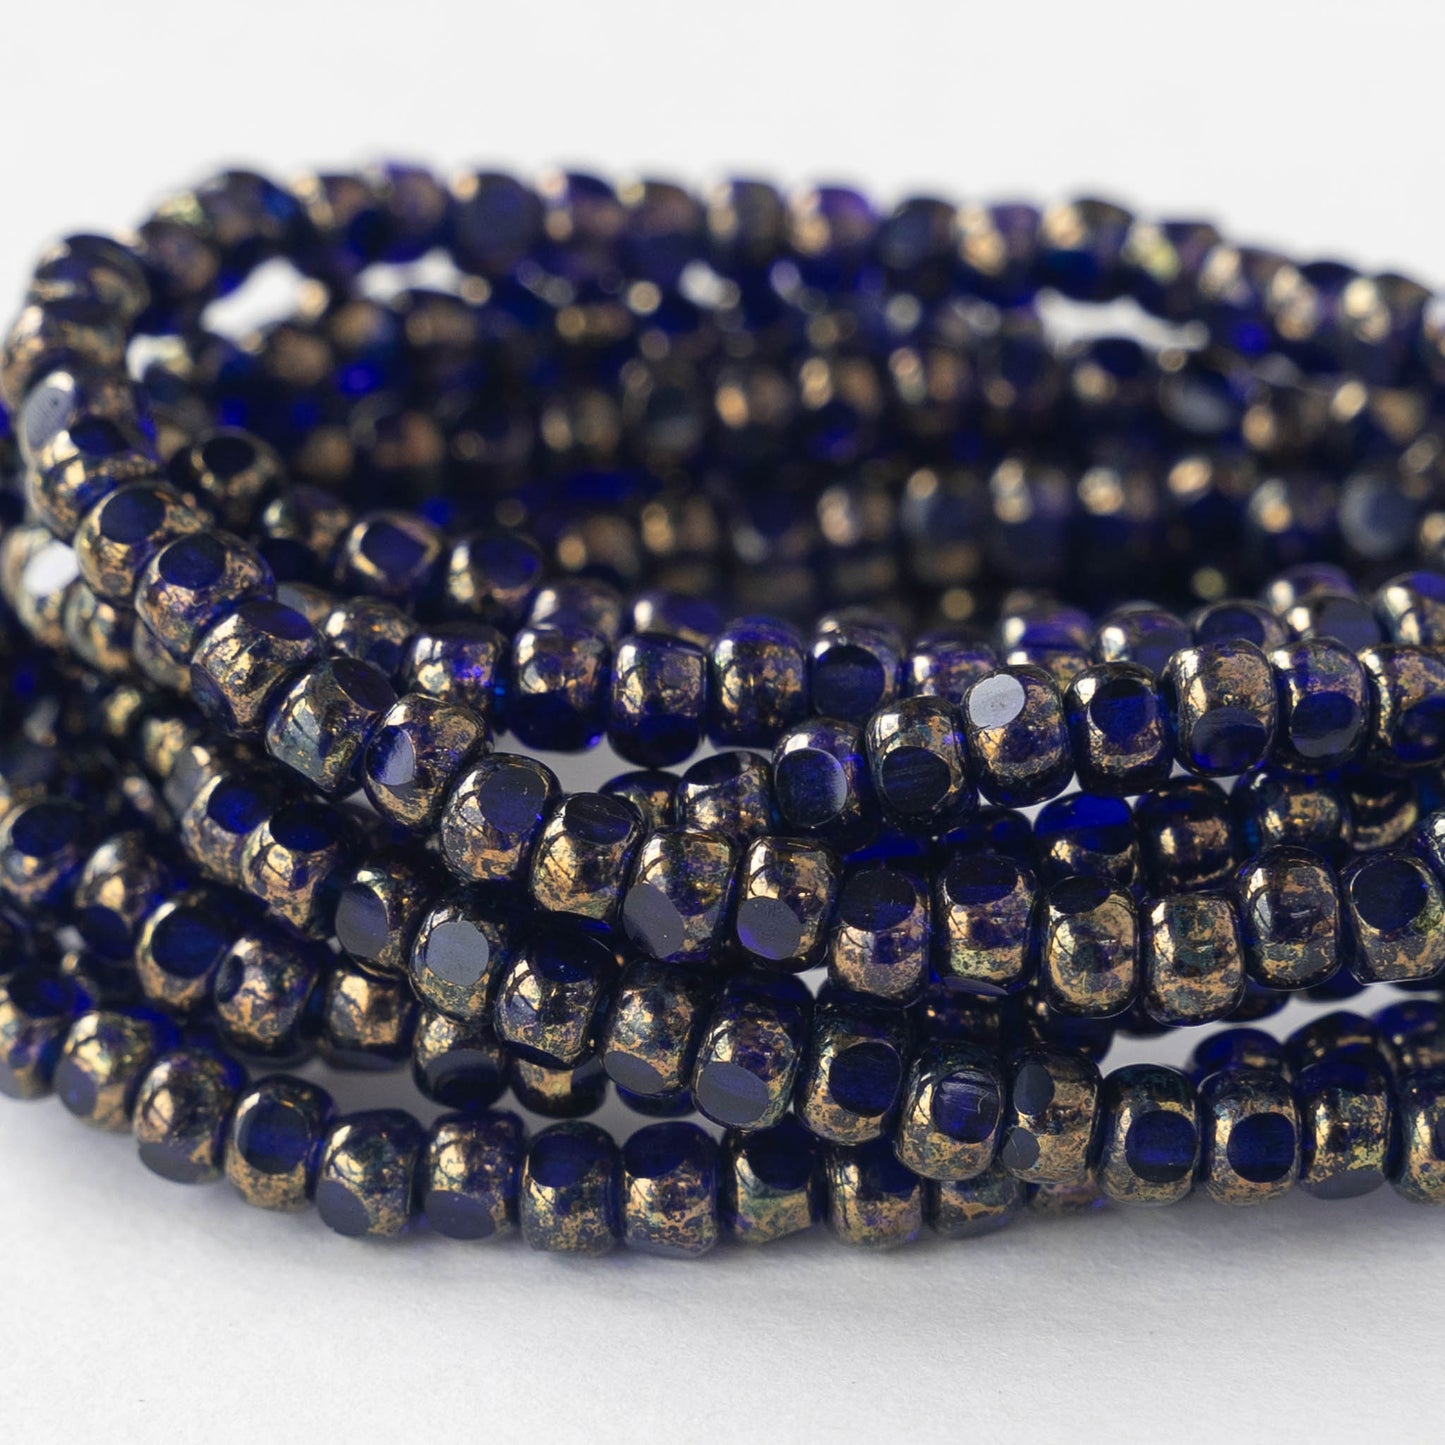 Size 6 Tri-cut Beads -  Cobalt Blue with Gold - 50 beads